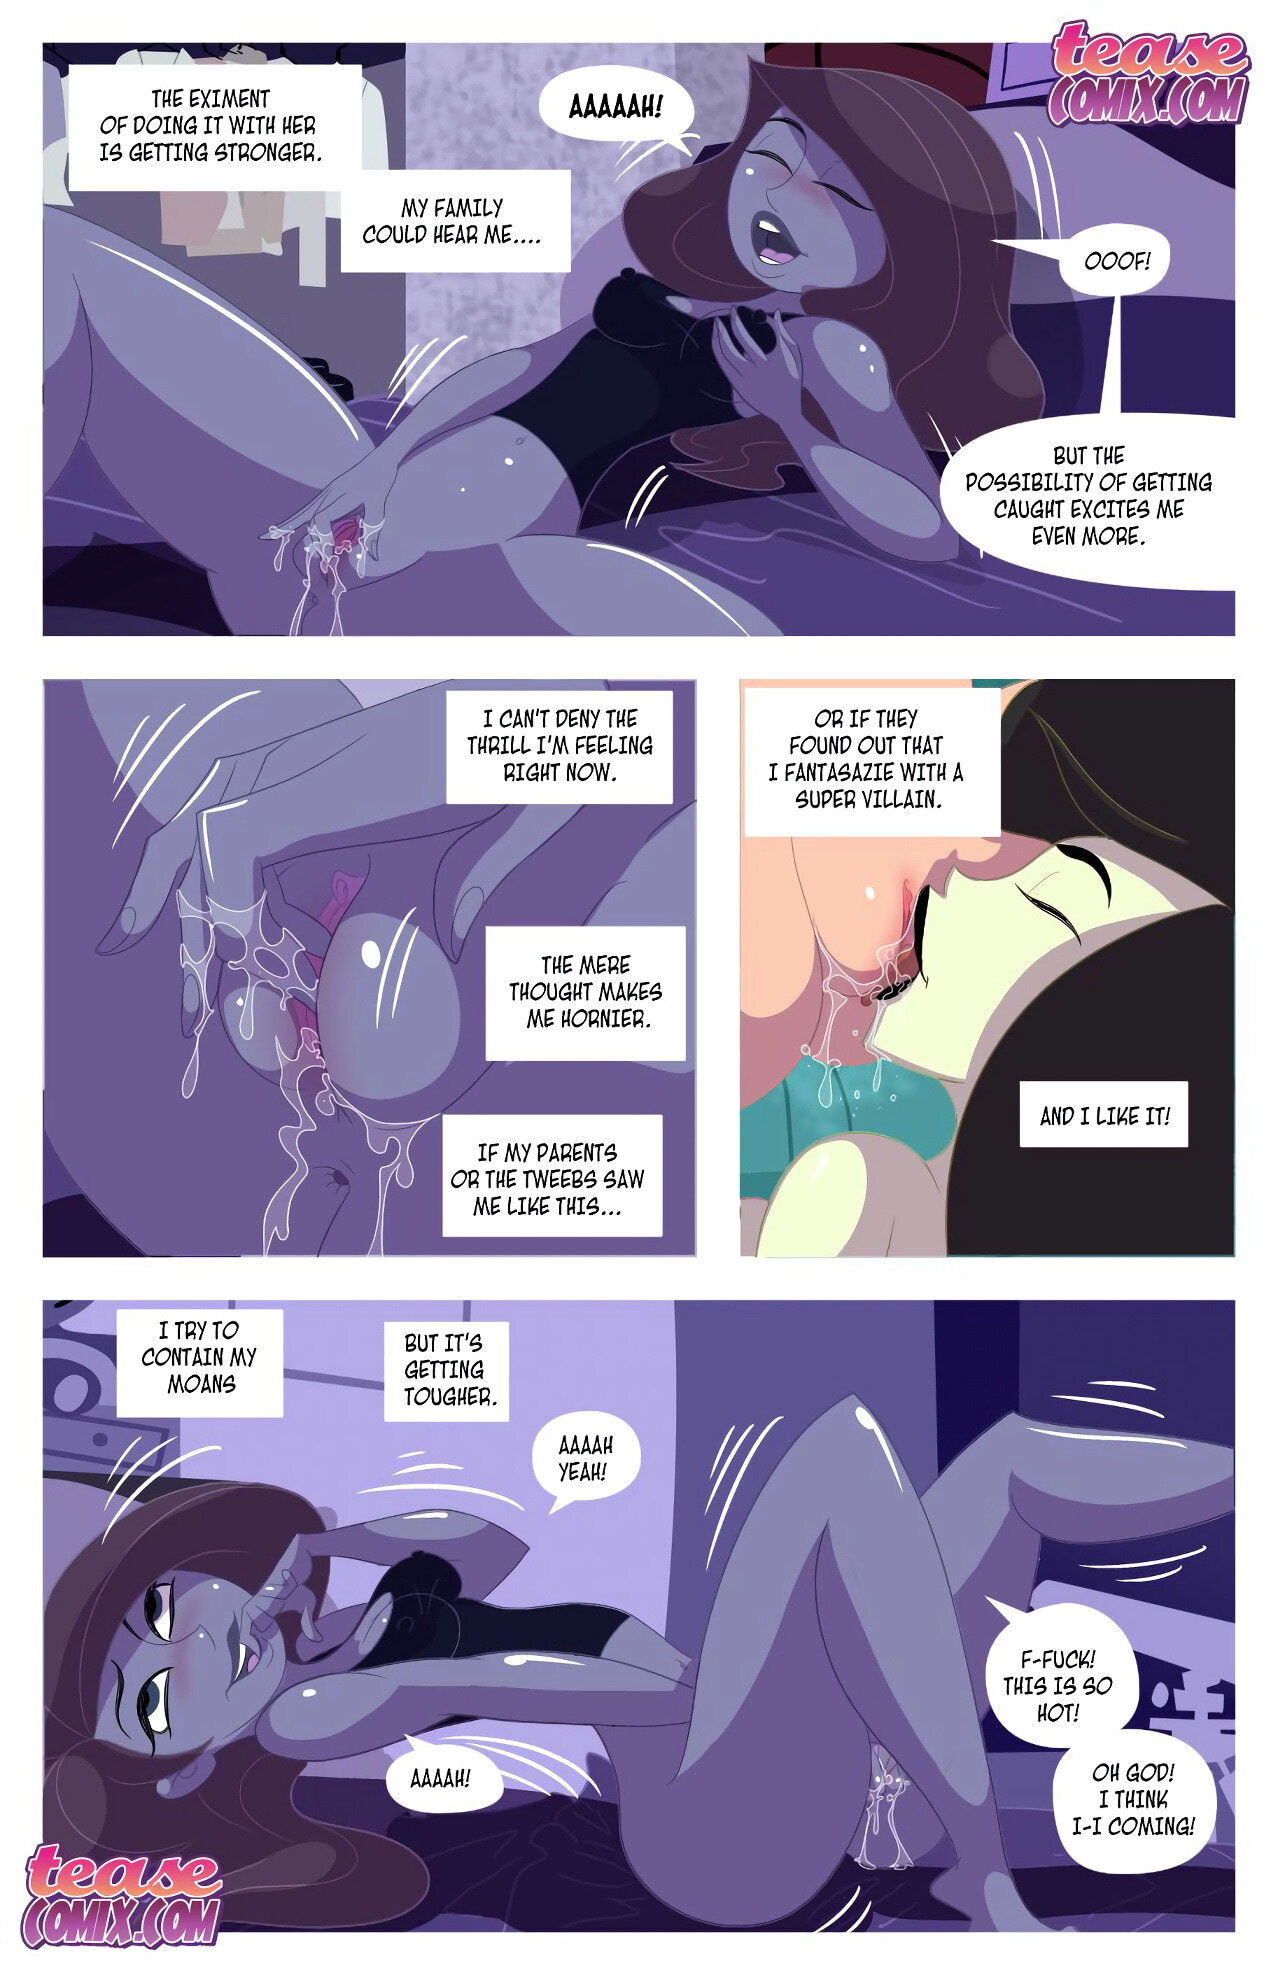 Kinky Possible - A Villain's Bitch Remastered - Page 17